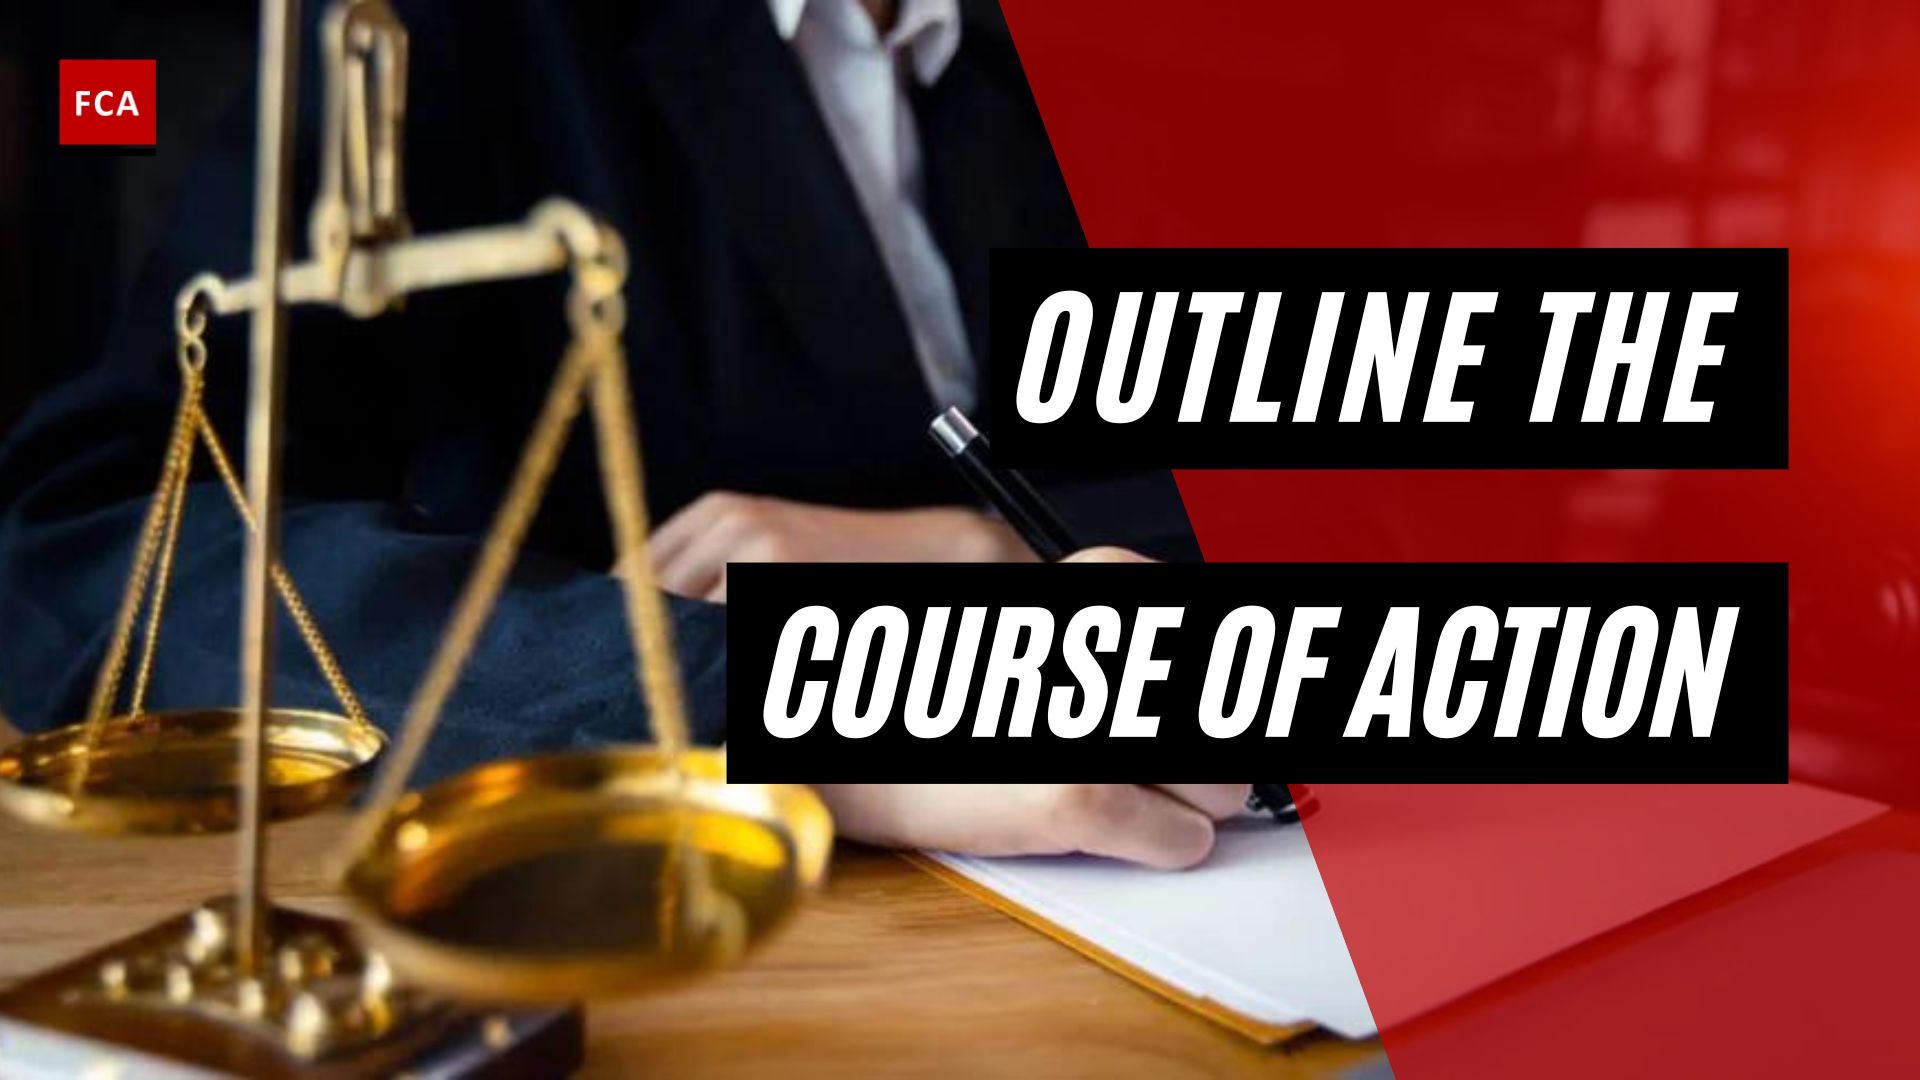 Outline The Course Of Action